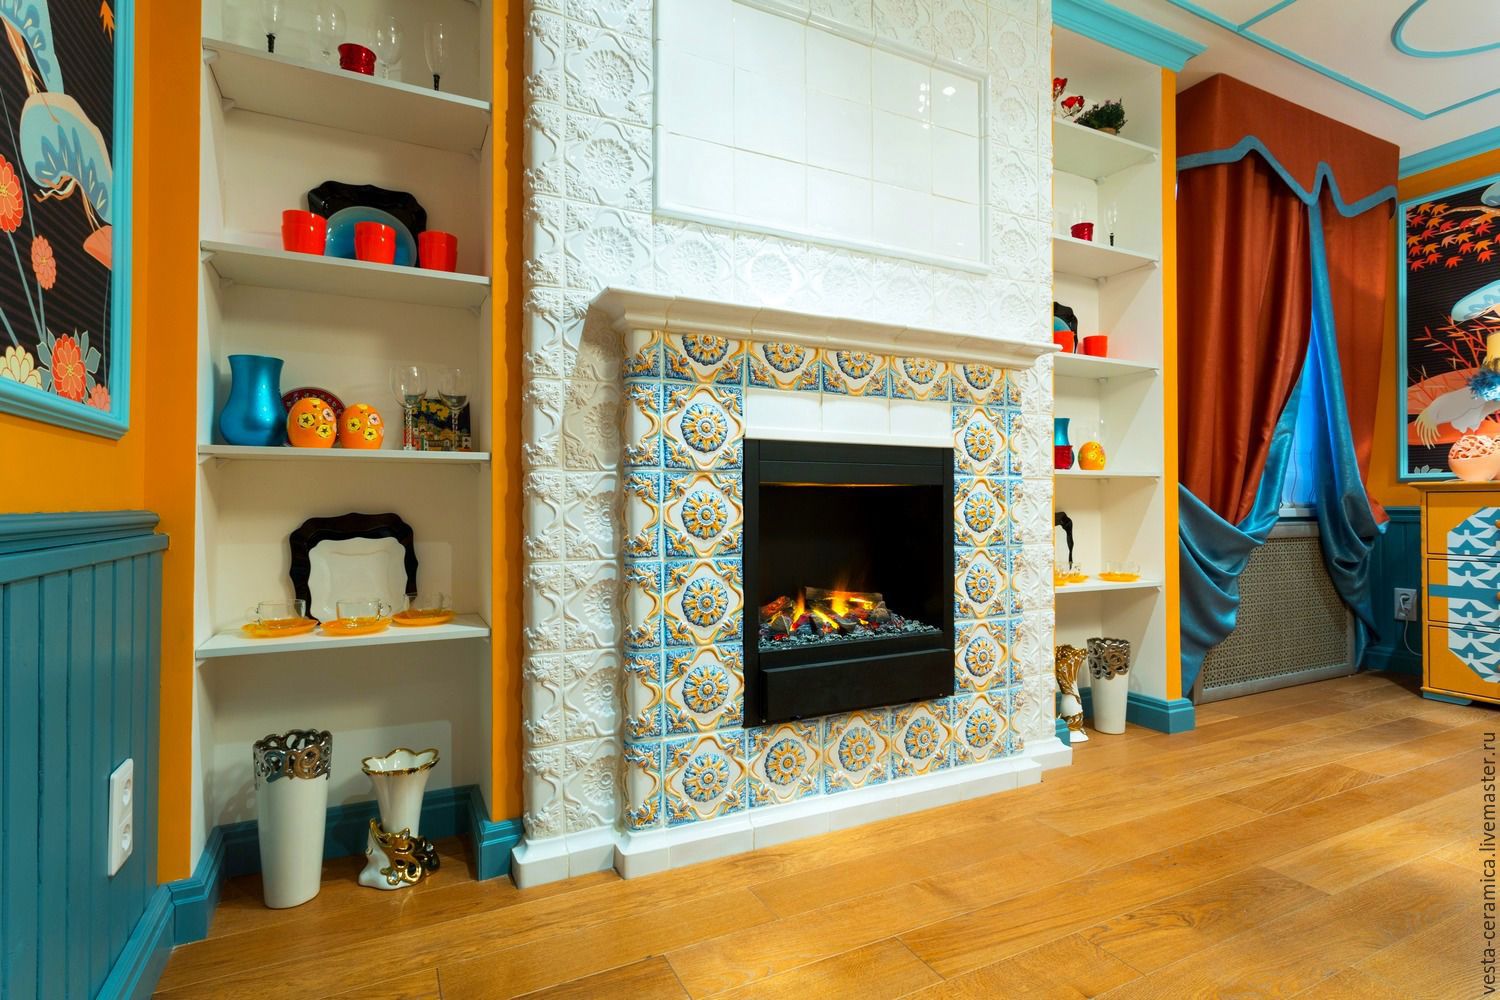 How to Tile Around Fireplace Awesome Tiled Fireplace